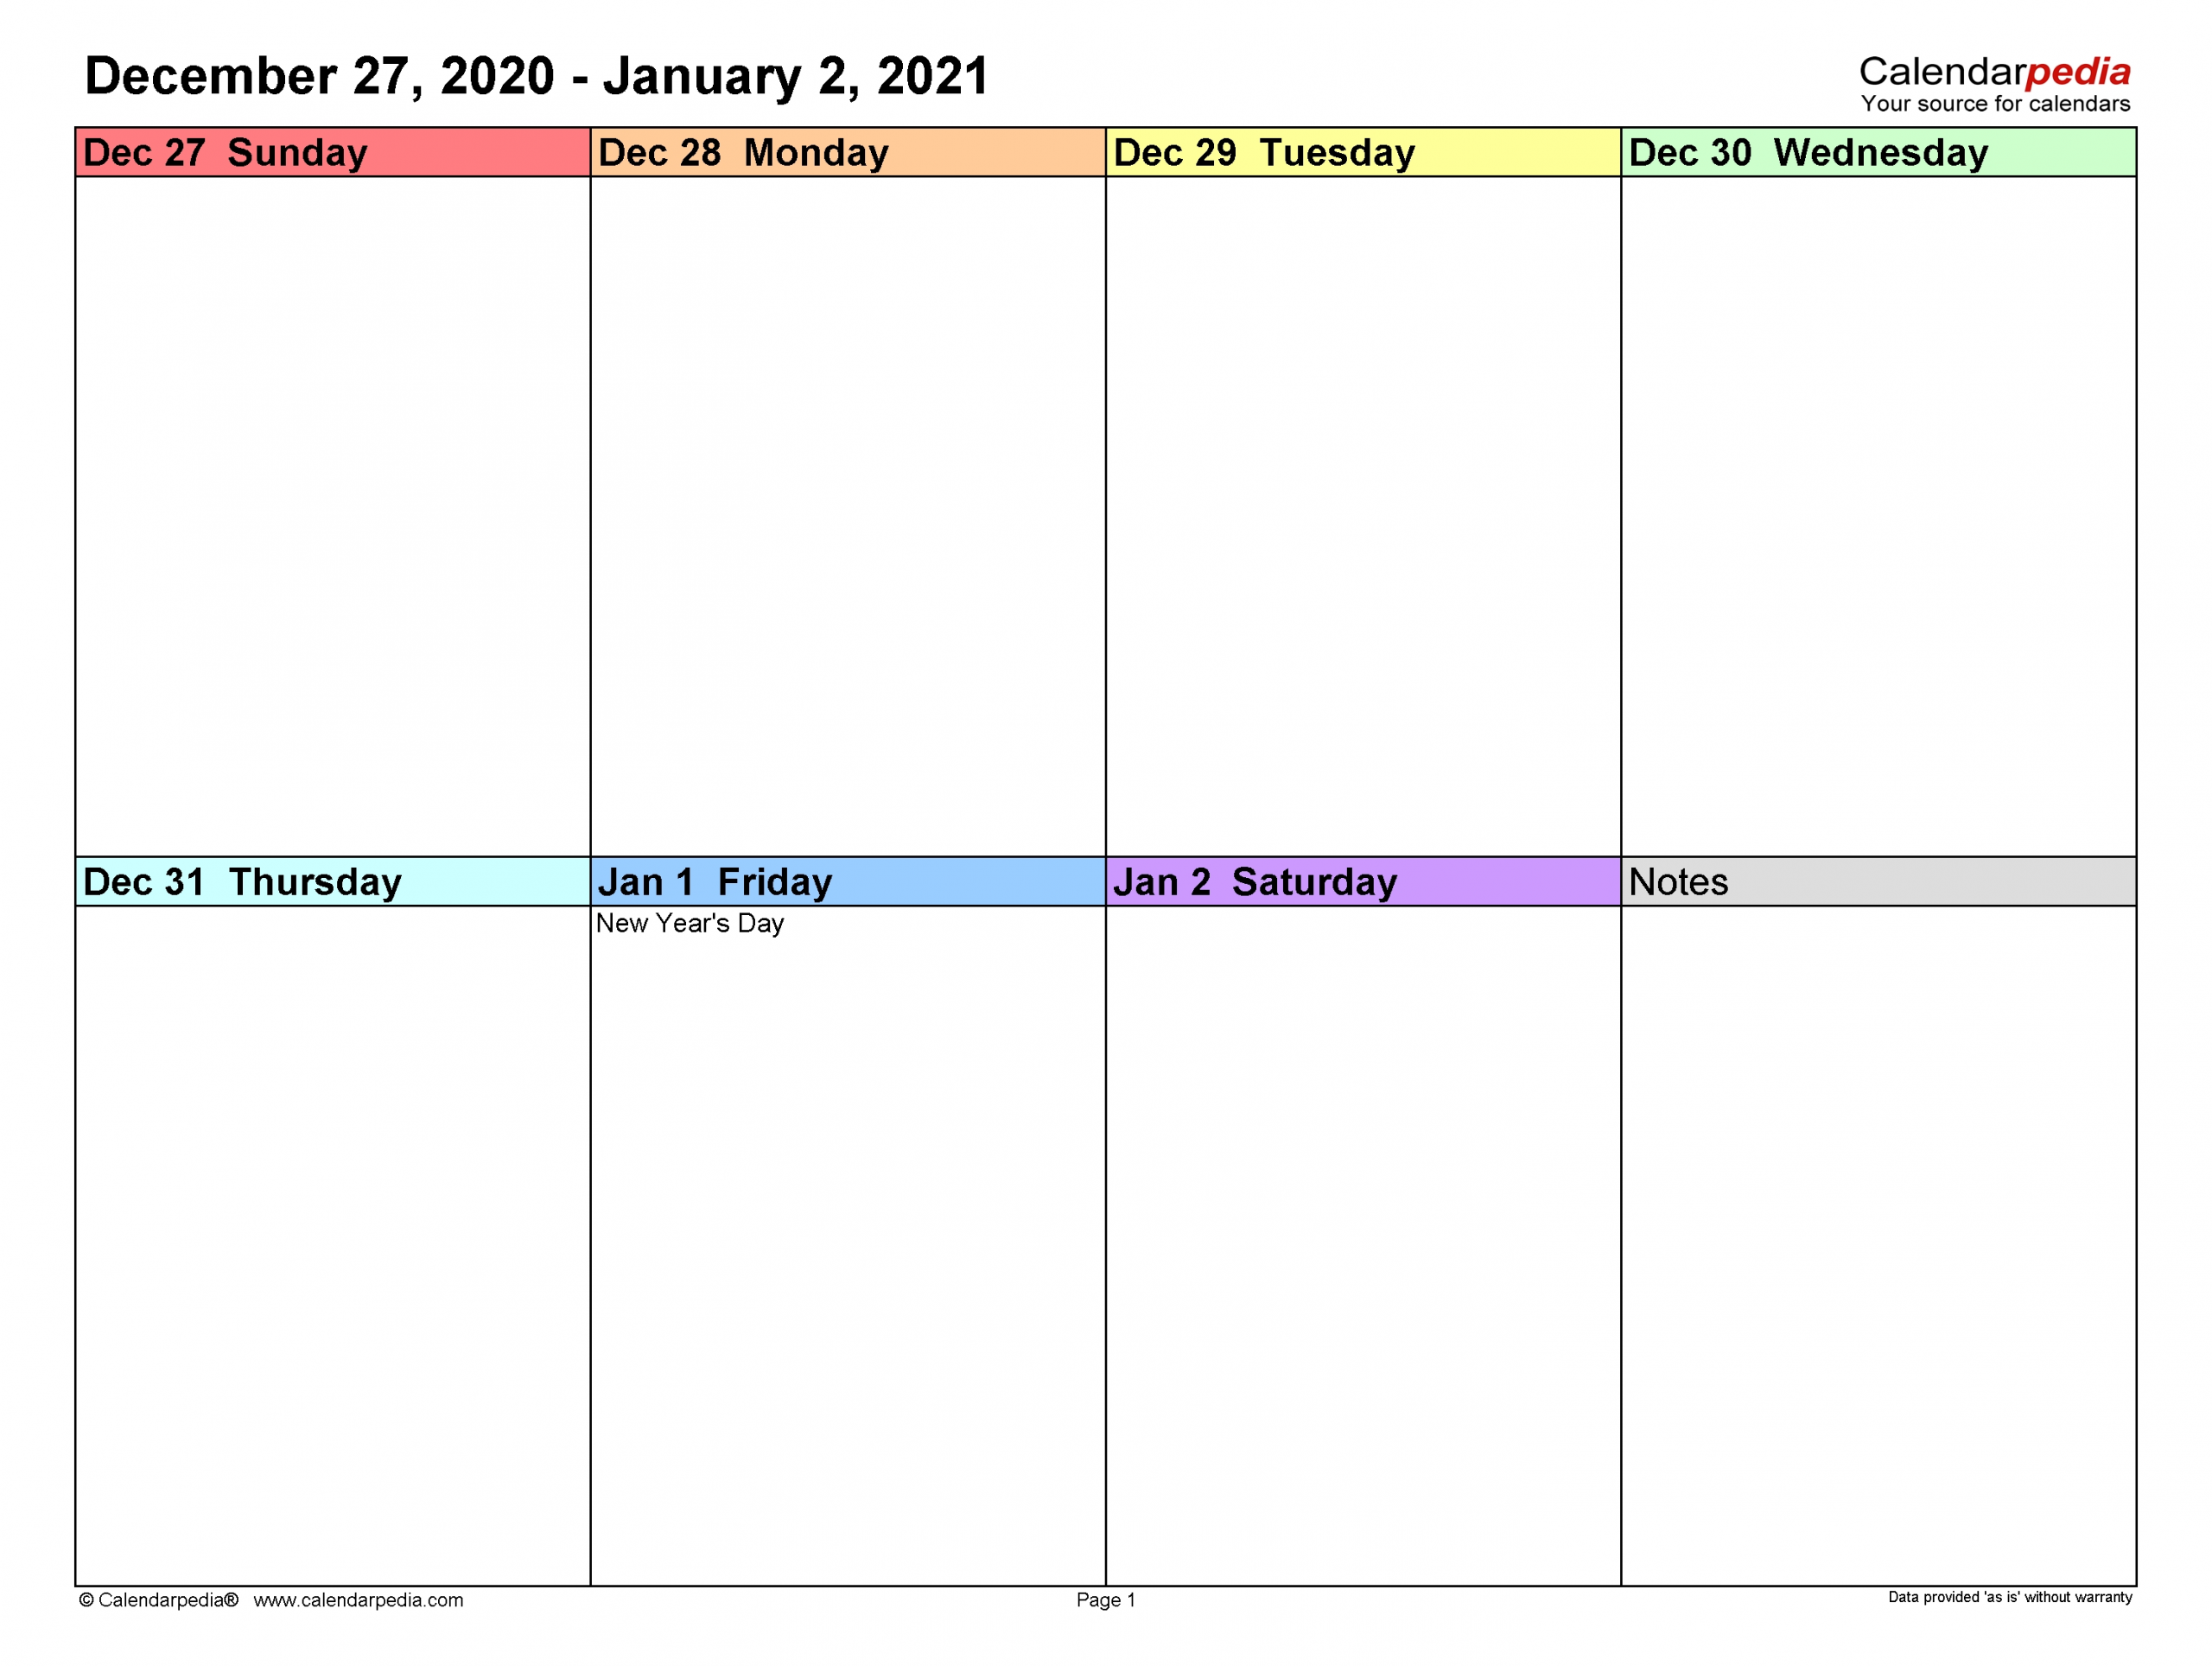 Weekly Calendars 2021 For Pdf - 12 Free Printable Templates